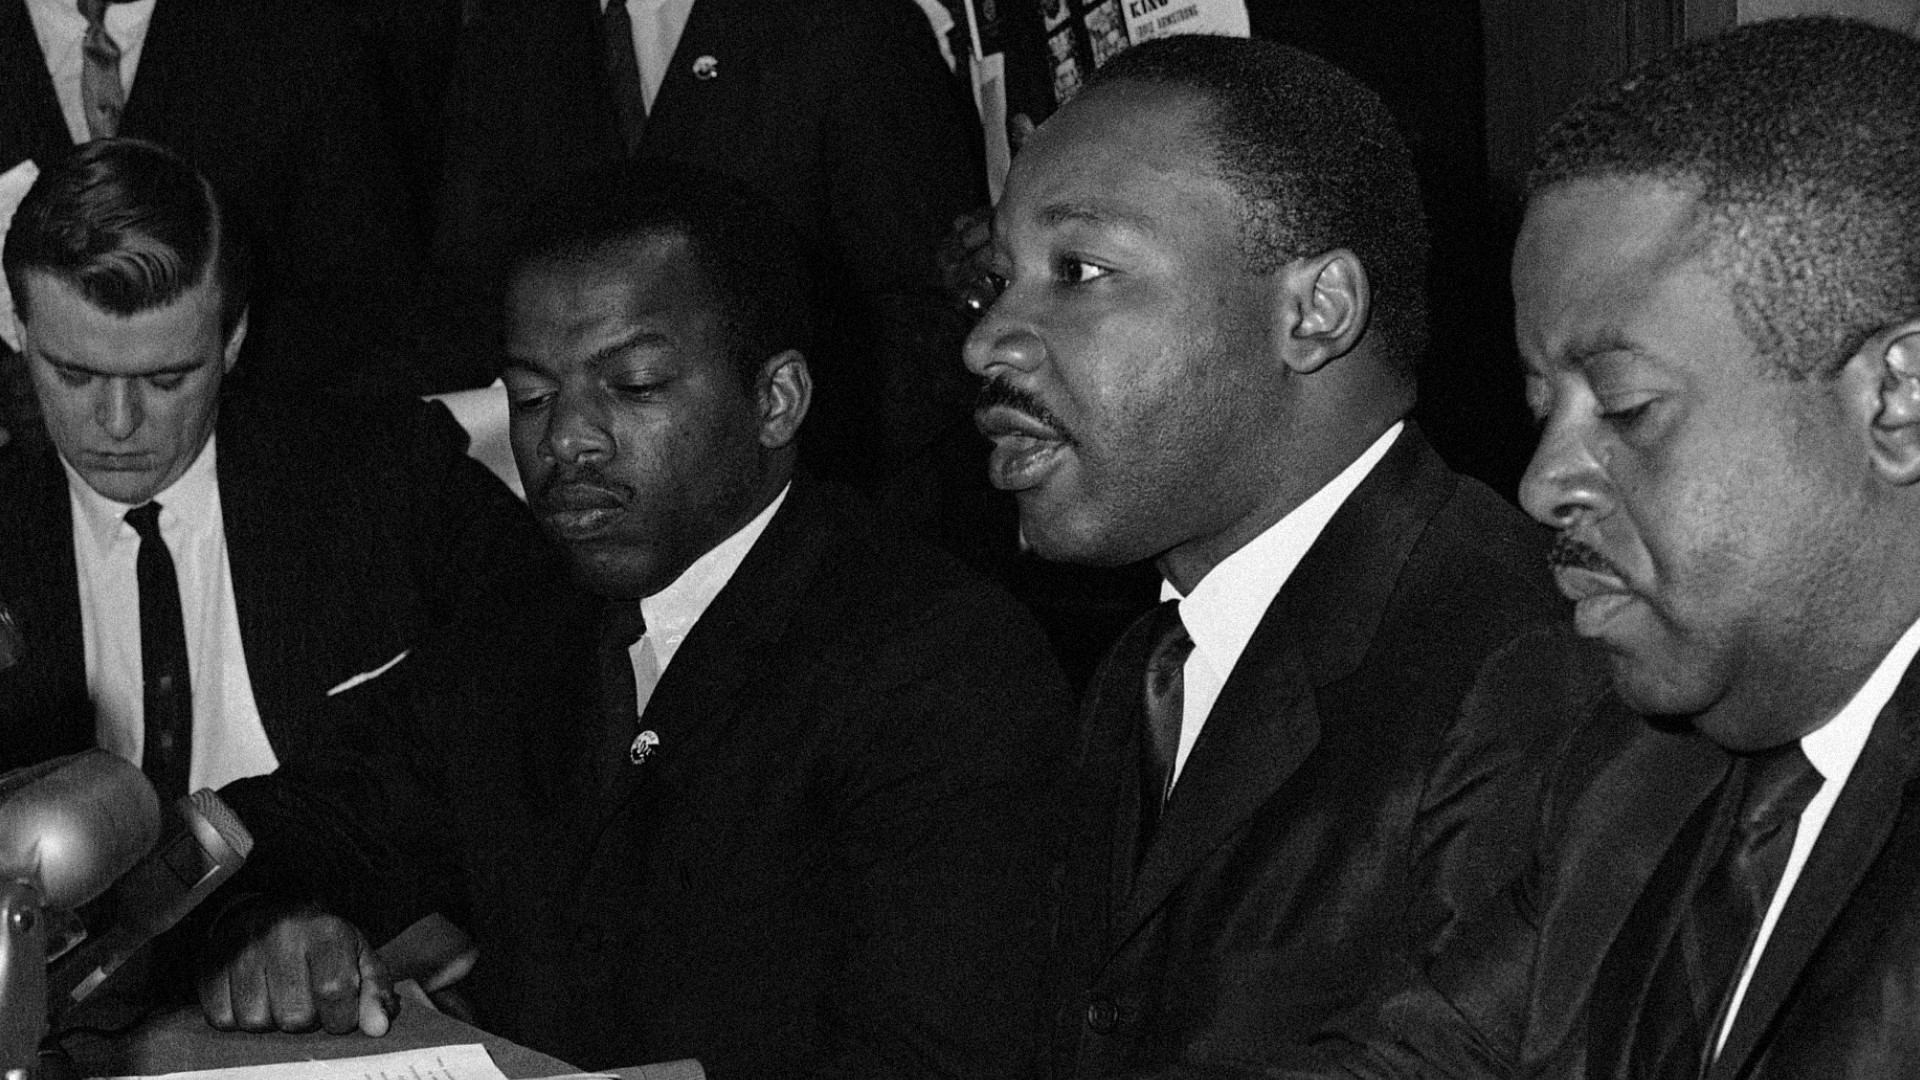 Over the years, John Lewis stood alongside thousands with the spirit of the ancestors. He now joins a famed line of civil rights luminaries who continue to inspire.